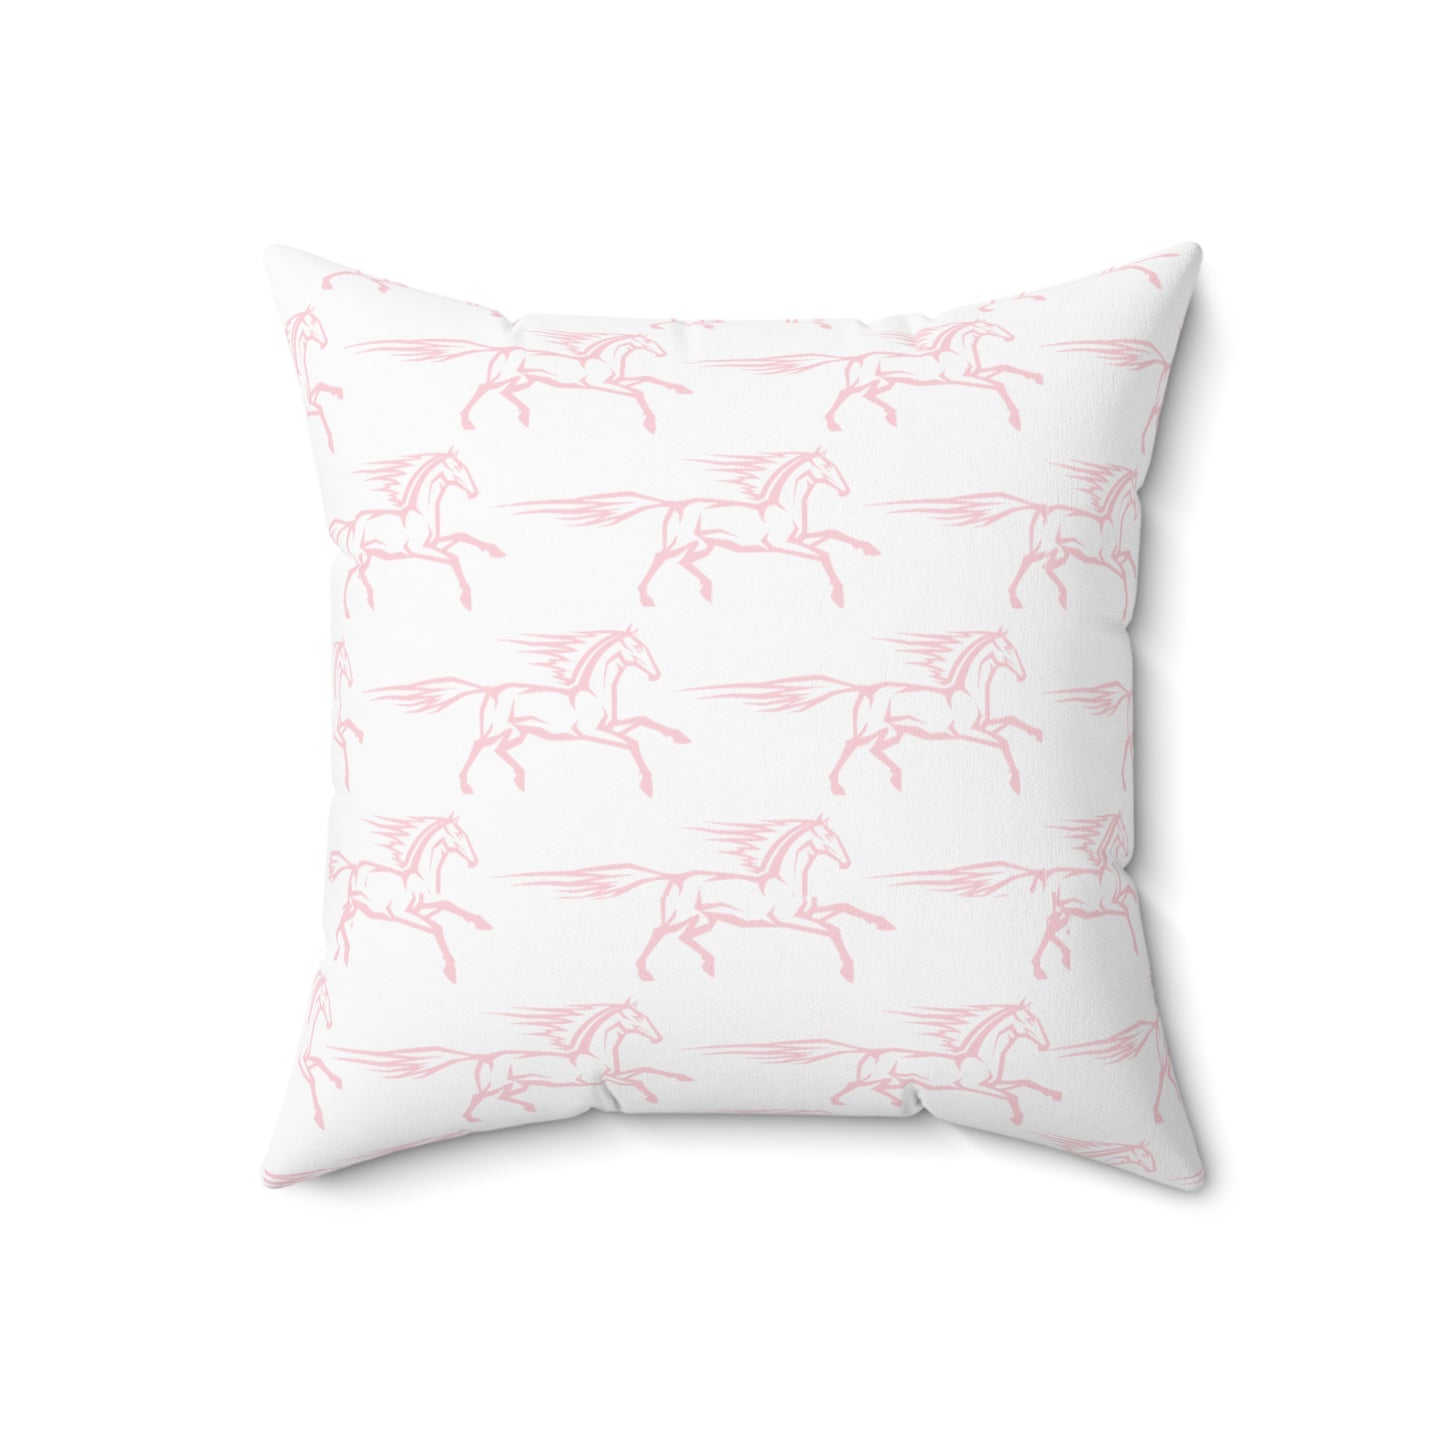 Pink Woman on Horseback Coquette Pink Bow Cowgirl Country Square Pillow Multiple Sizes